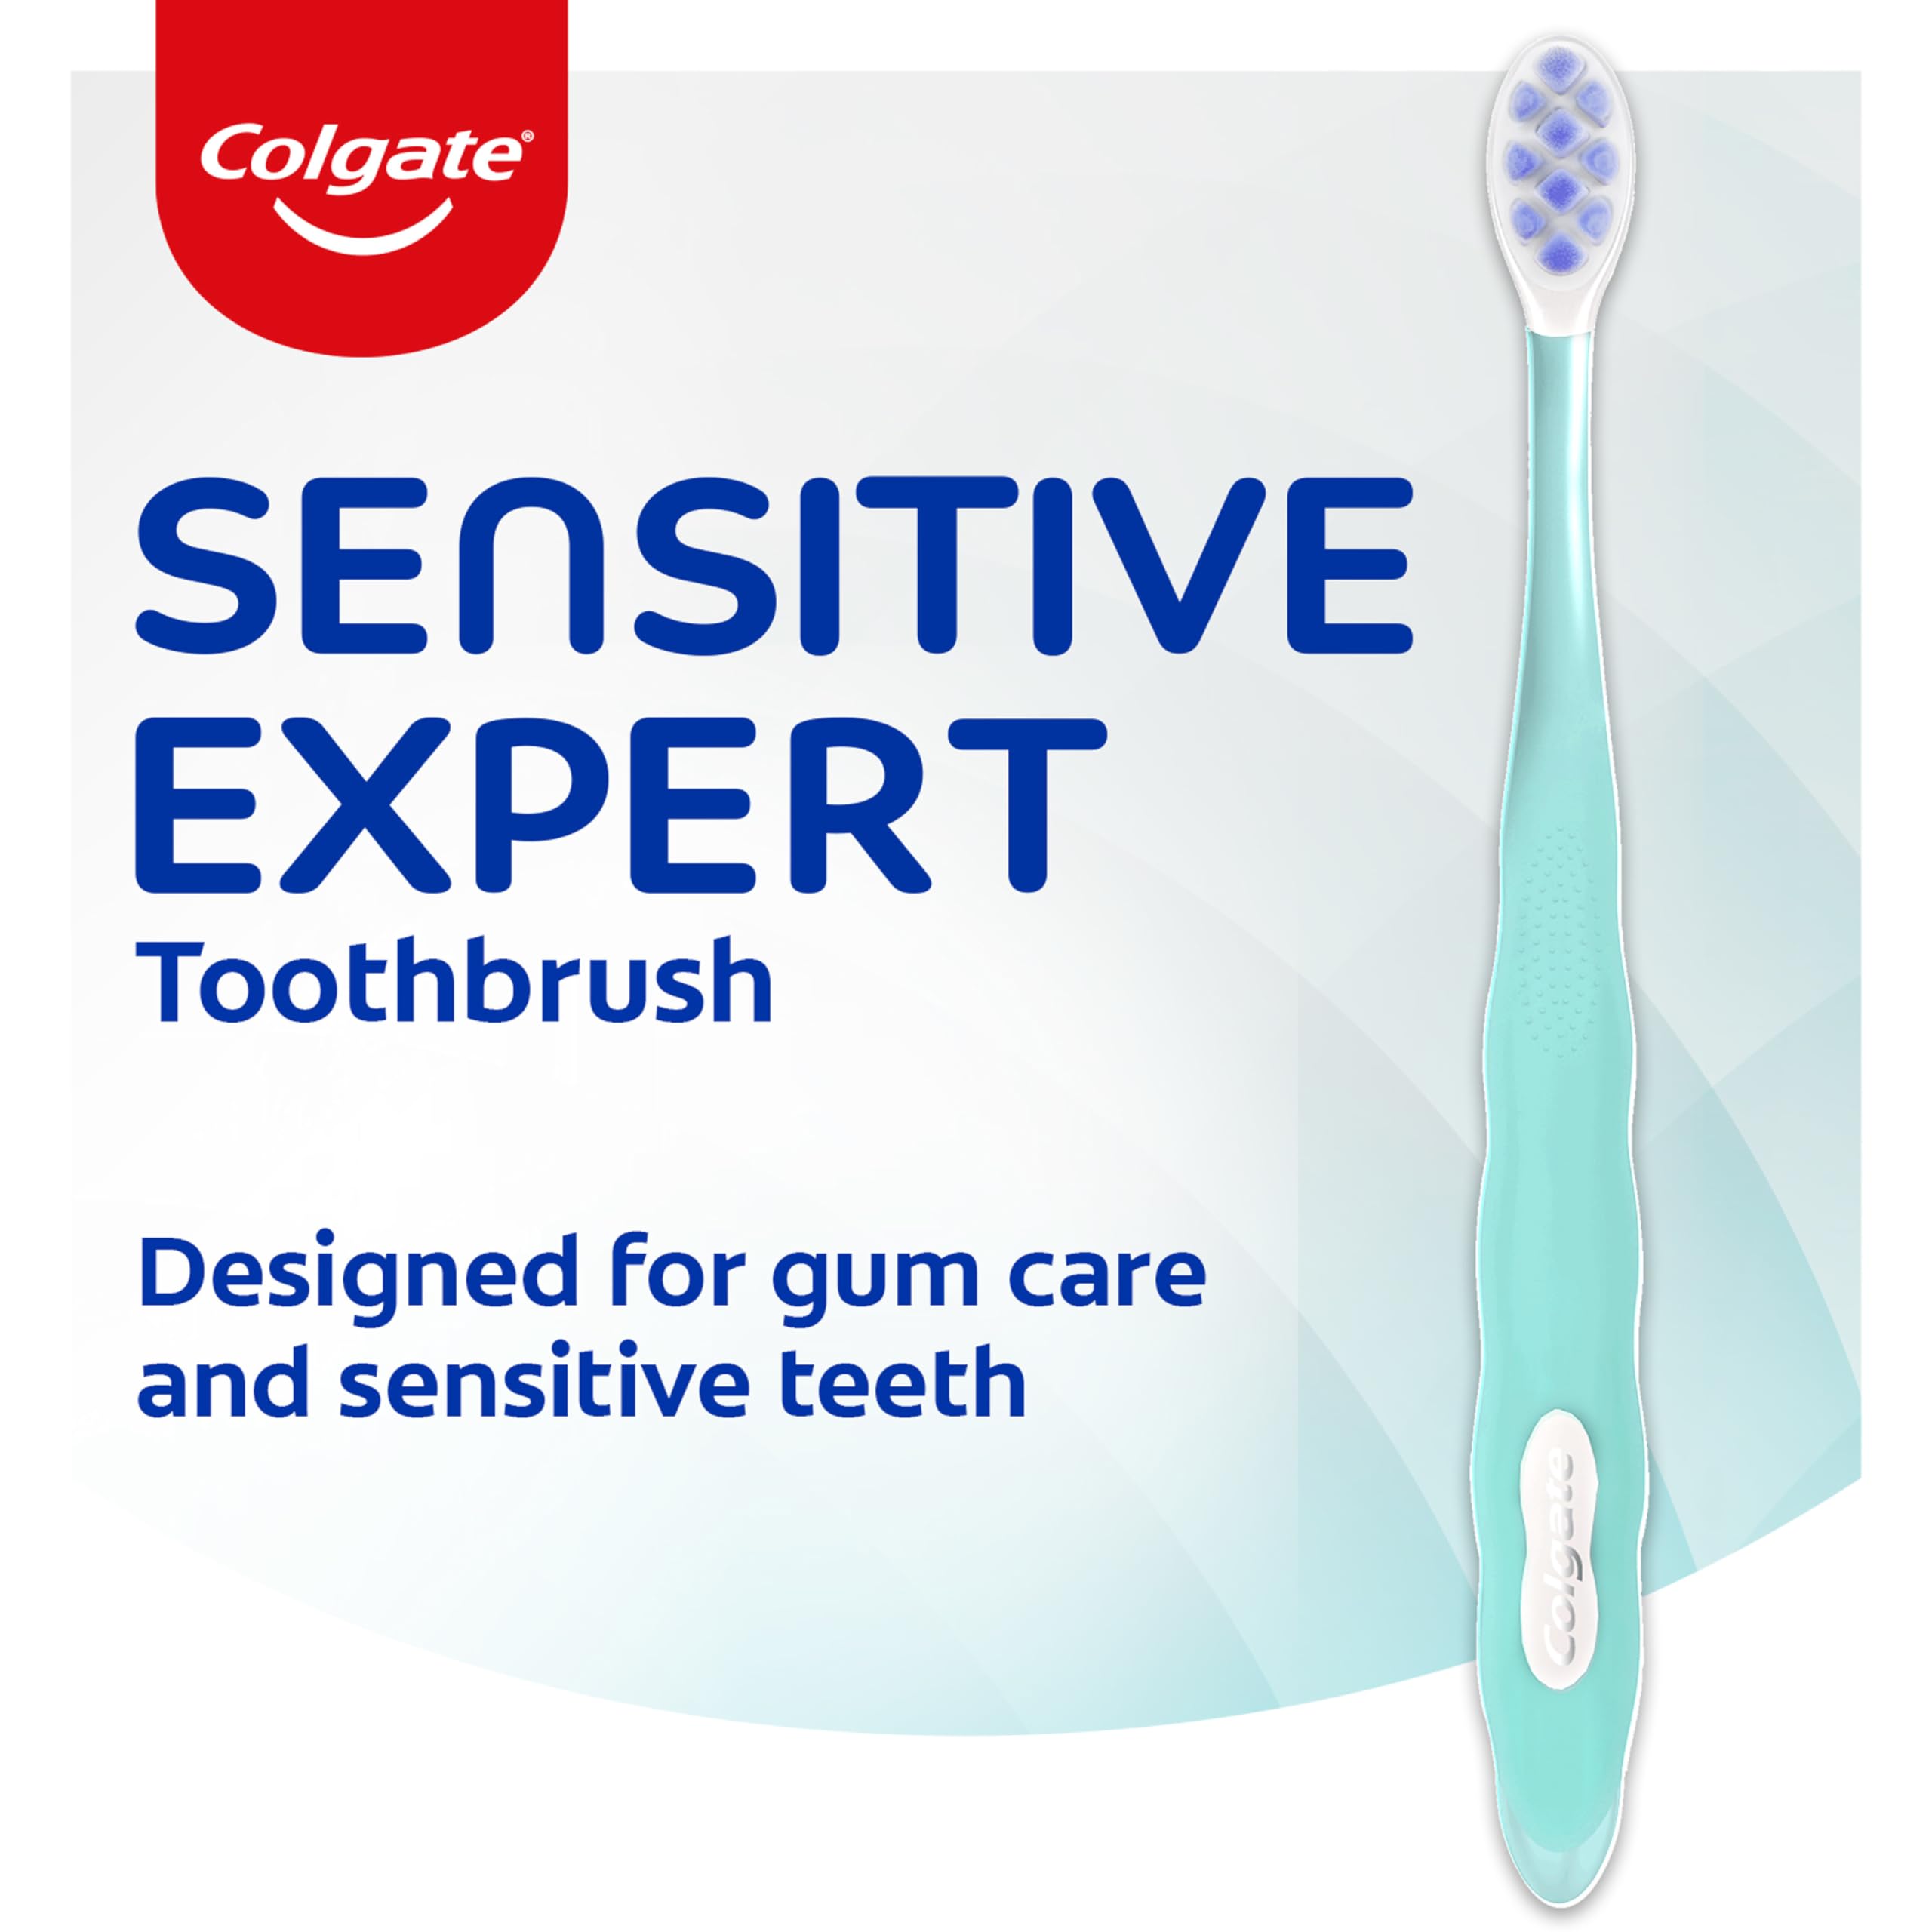 Colgate Sensitive Expert Ultra Soft Sensitive Toothbrush Pack, Extra Soft Toothbrush for Sensitive Gums and Teeth, Gently Cleans Teeth and Gums, 2 Pack